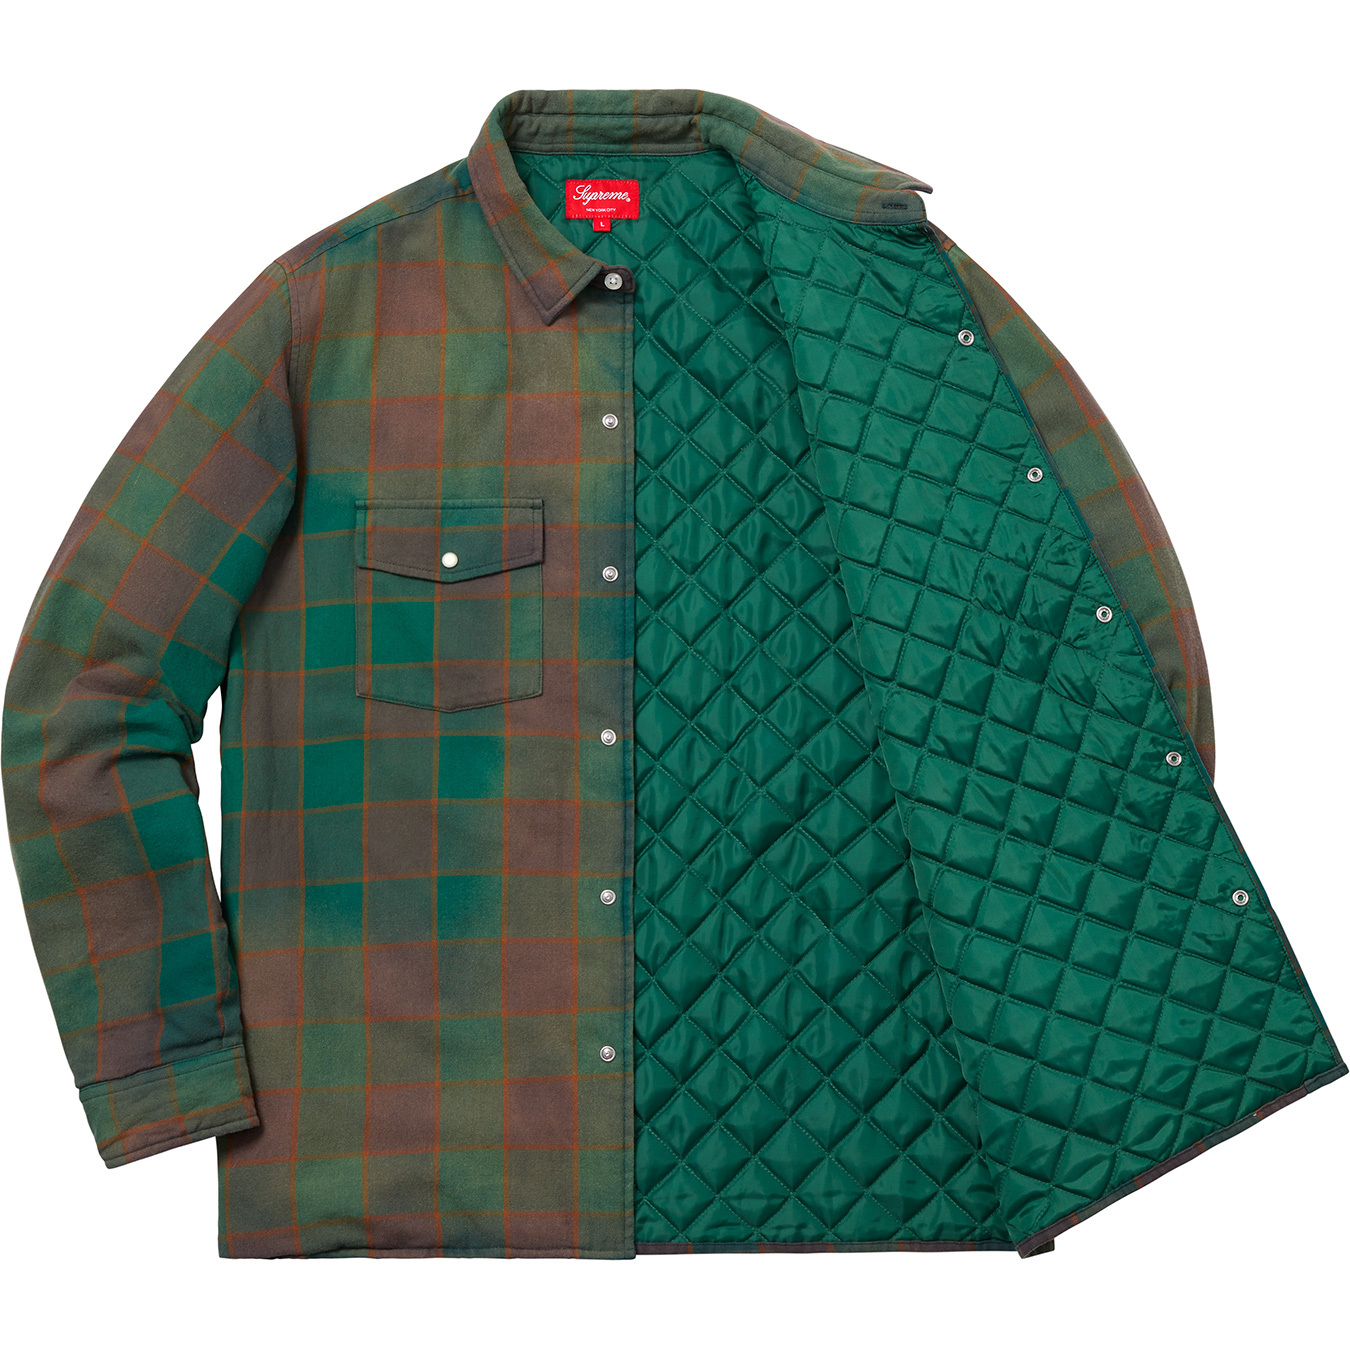 Quilted Faded Plaid Shirt - fall winter 2018 - Supreme